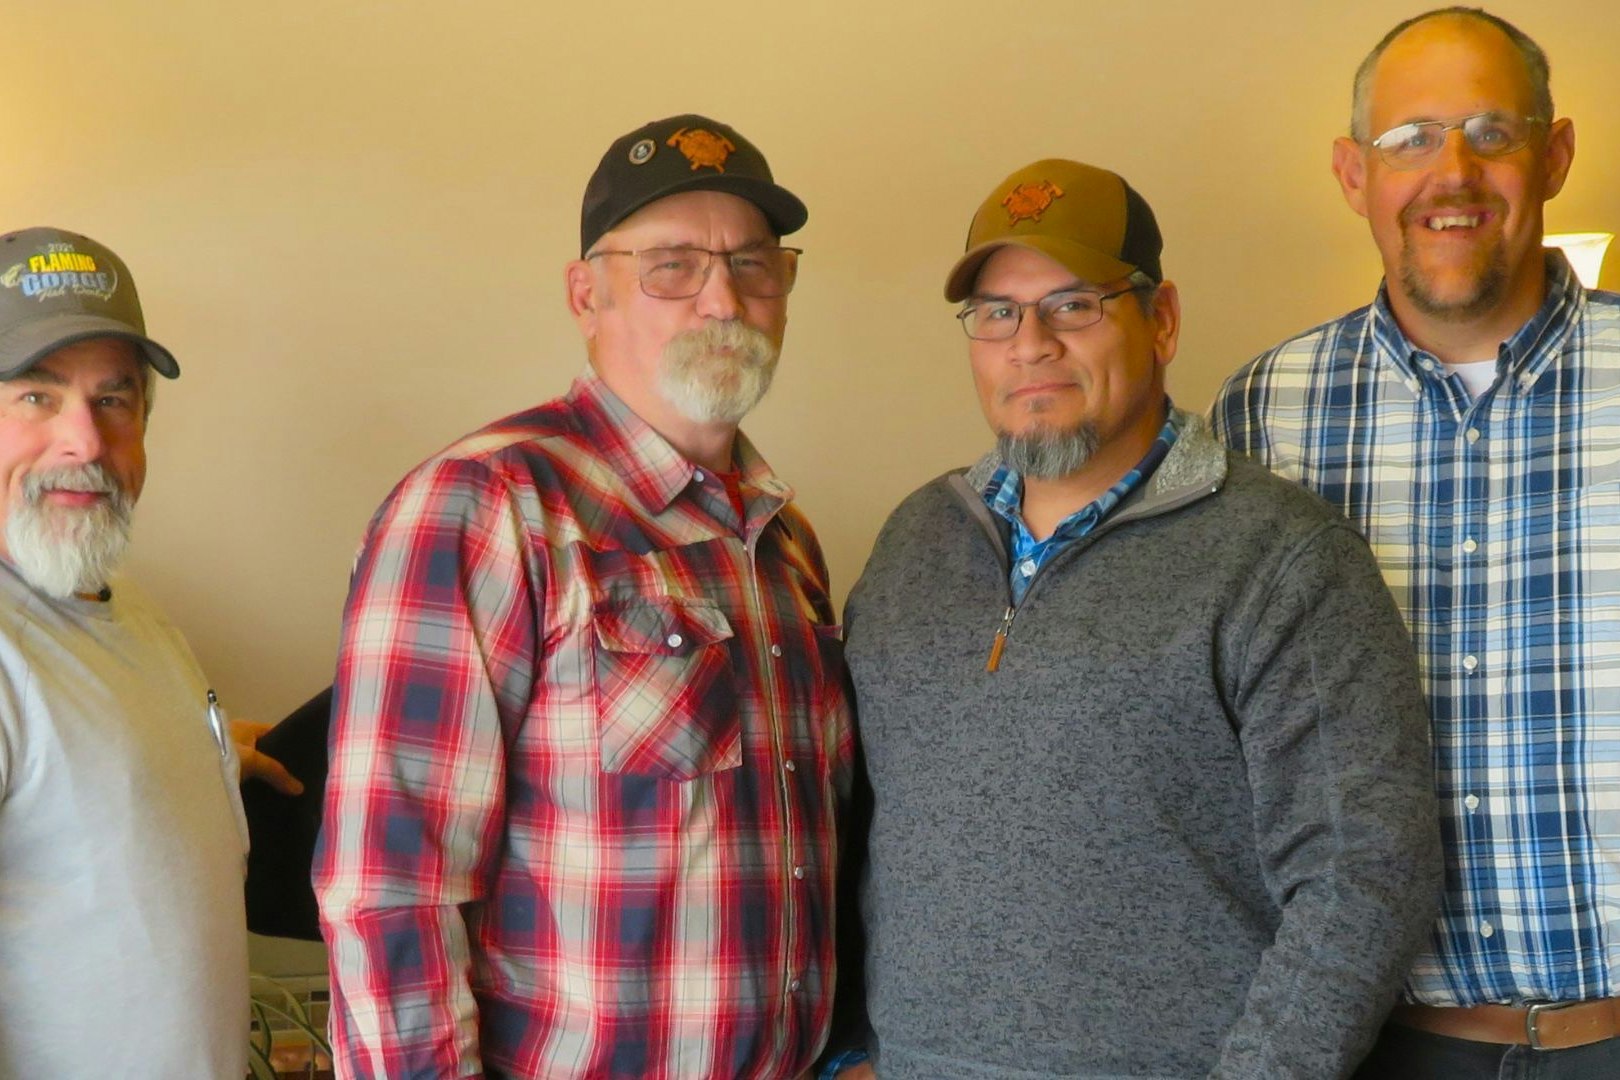 Wyoming Department of Transportation workers, from left, Craig Brown, Fred Sherburne, Catarino Zapata and Logan Whipple were recently recognized for their heroic actions saving a man from a suicide attempt in January.